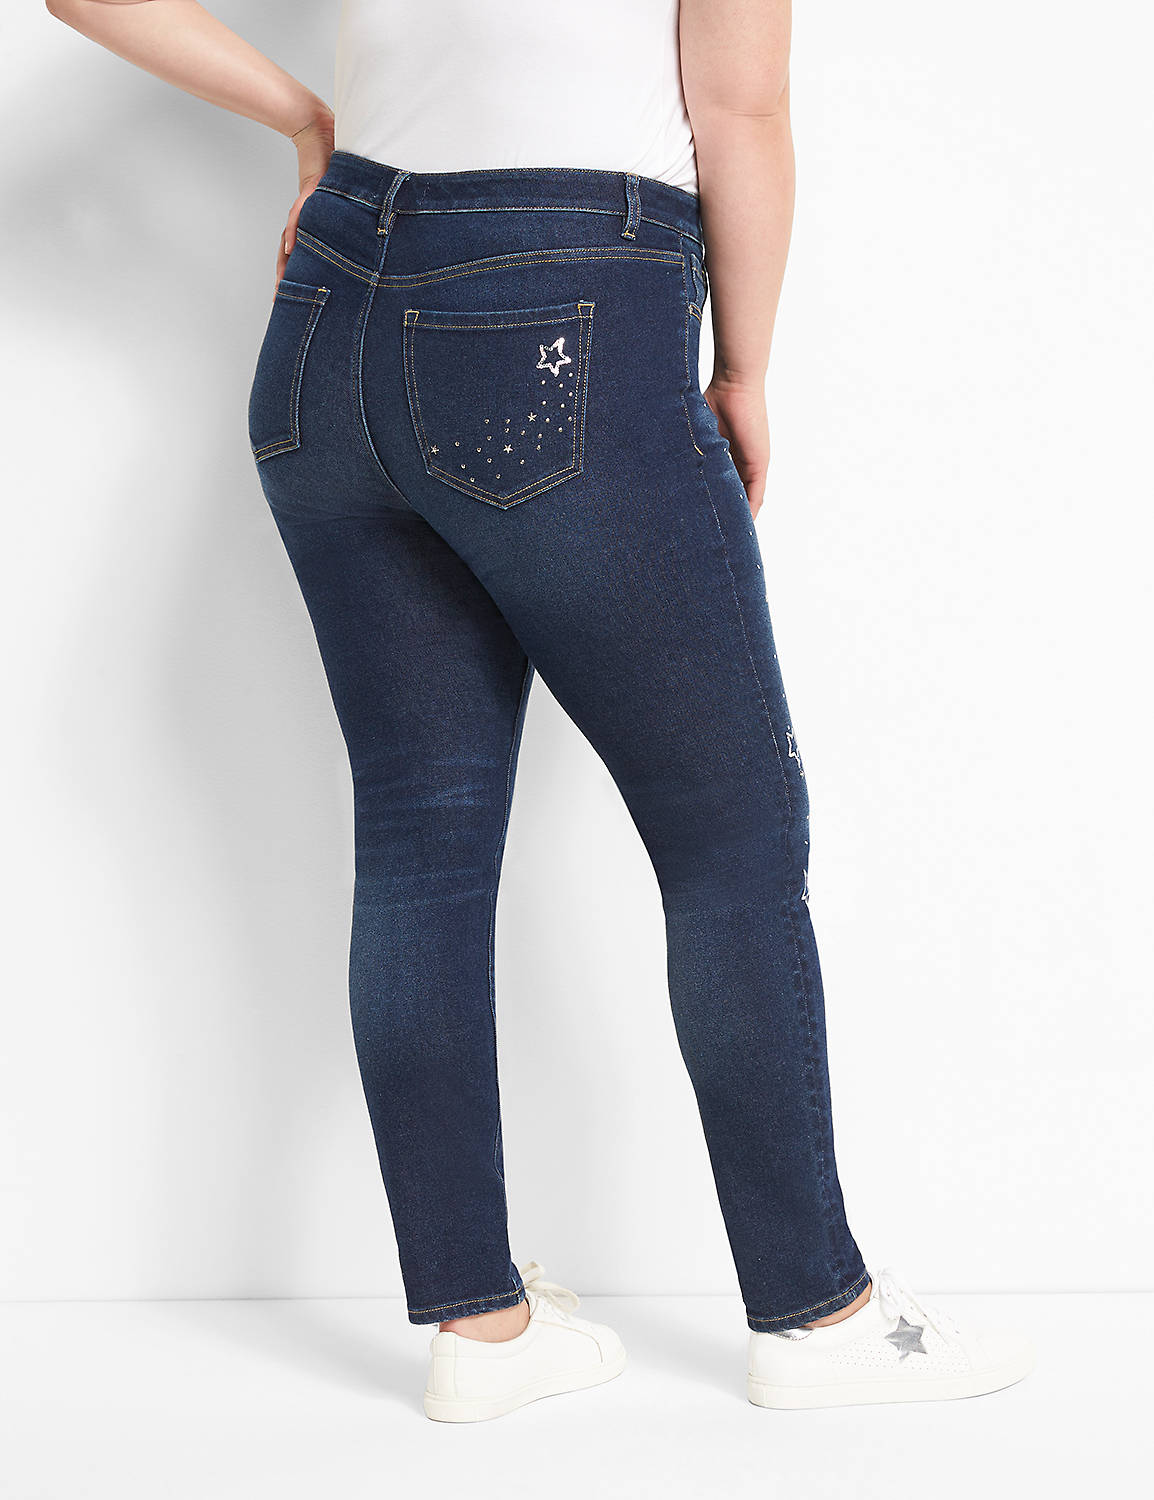 Signature Fit High-Rise Skinny Jeans - Dark Wash Product Image 2